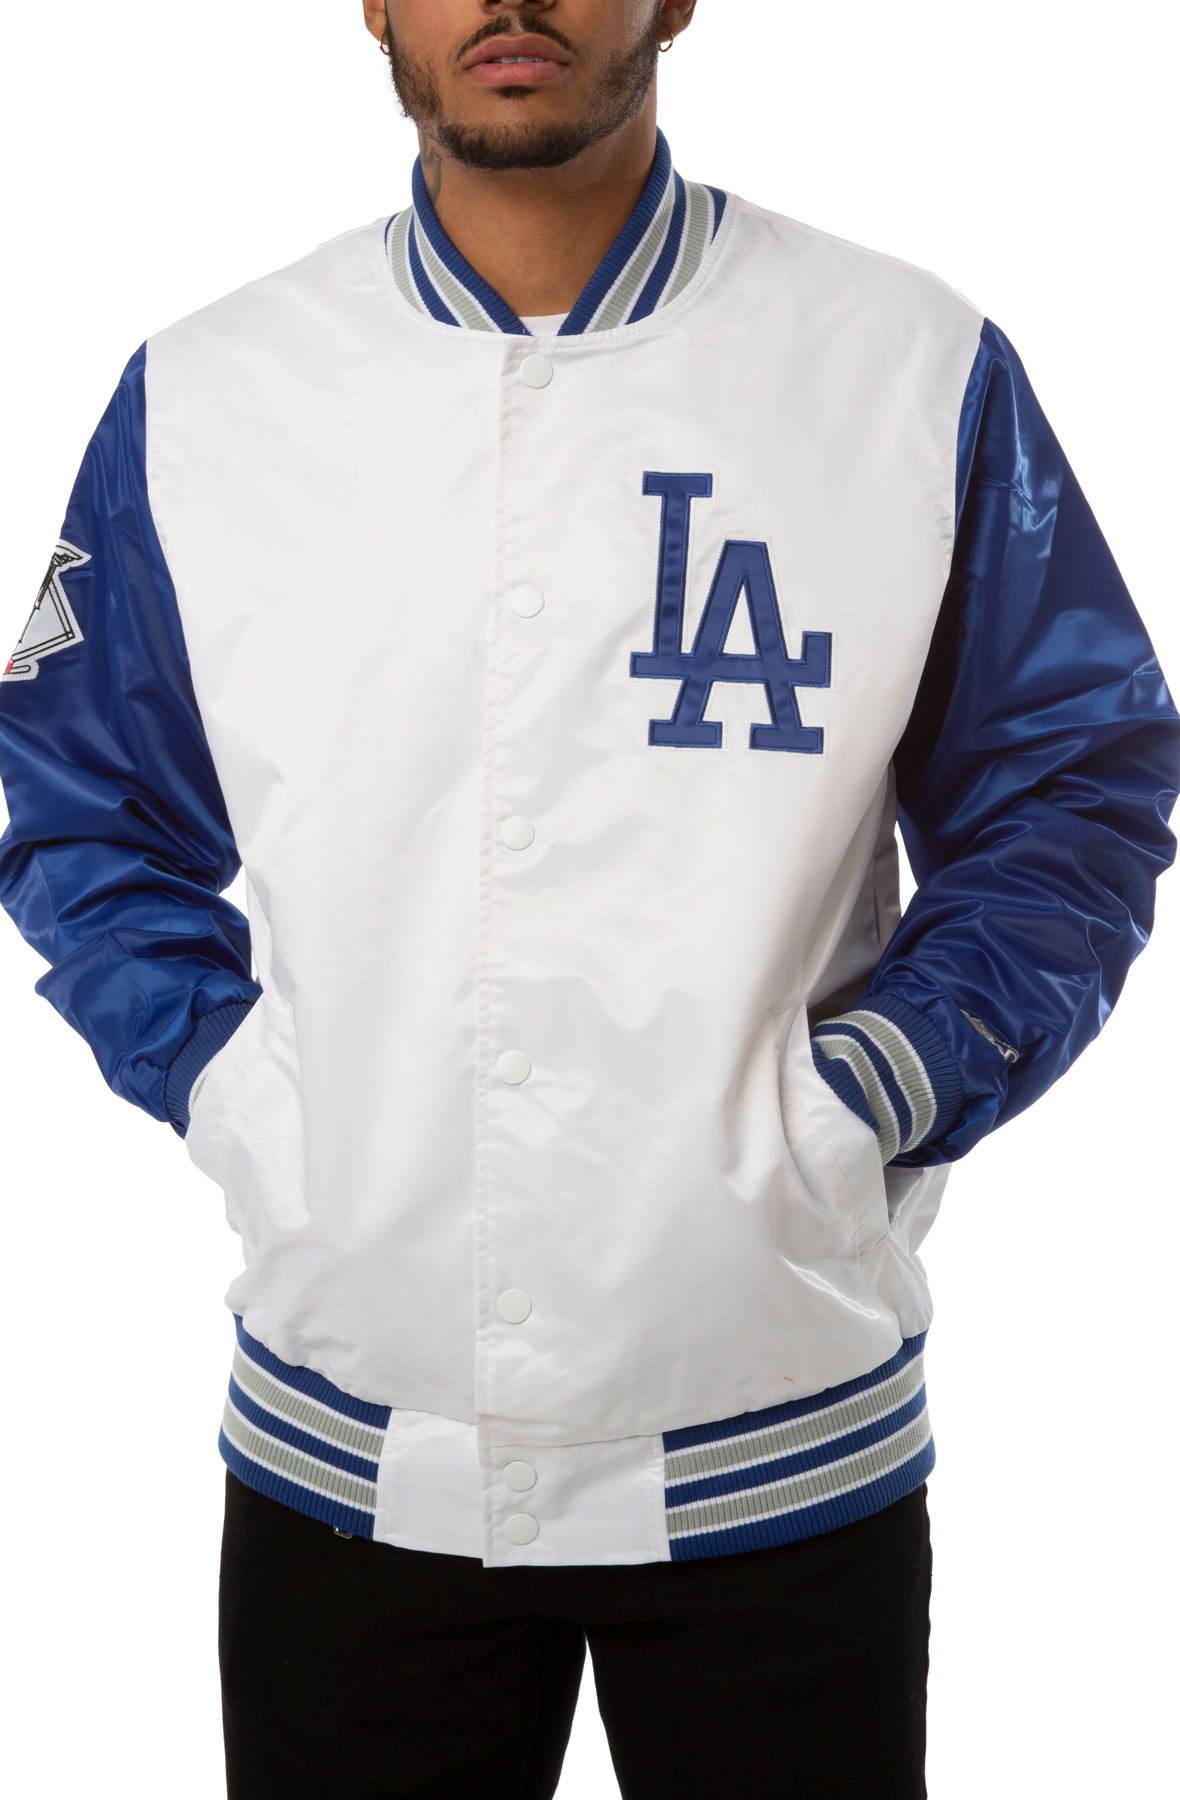 LA Dodgers Varsity Jacket white leather sleeves with blue wool by IW